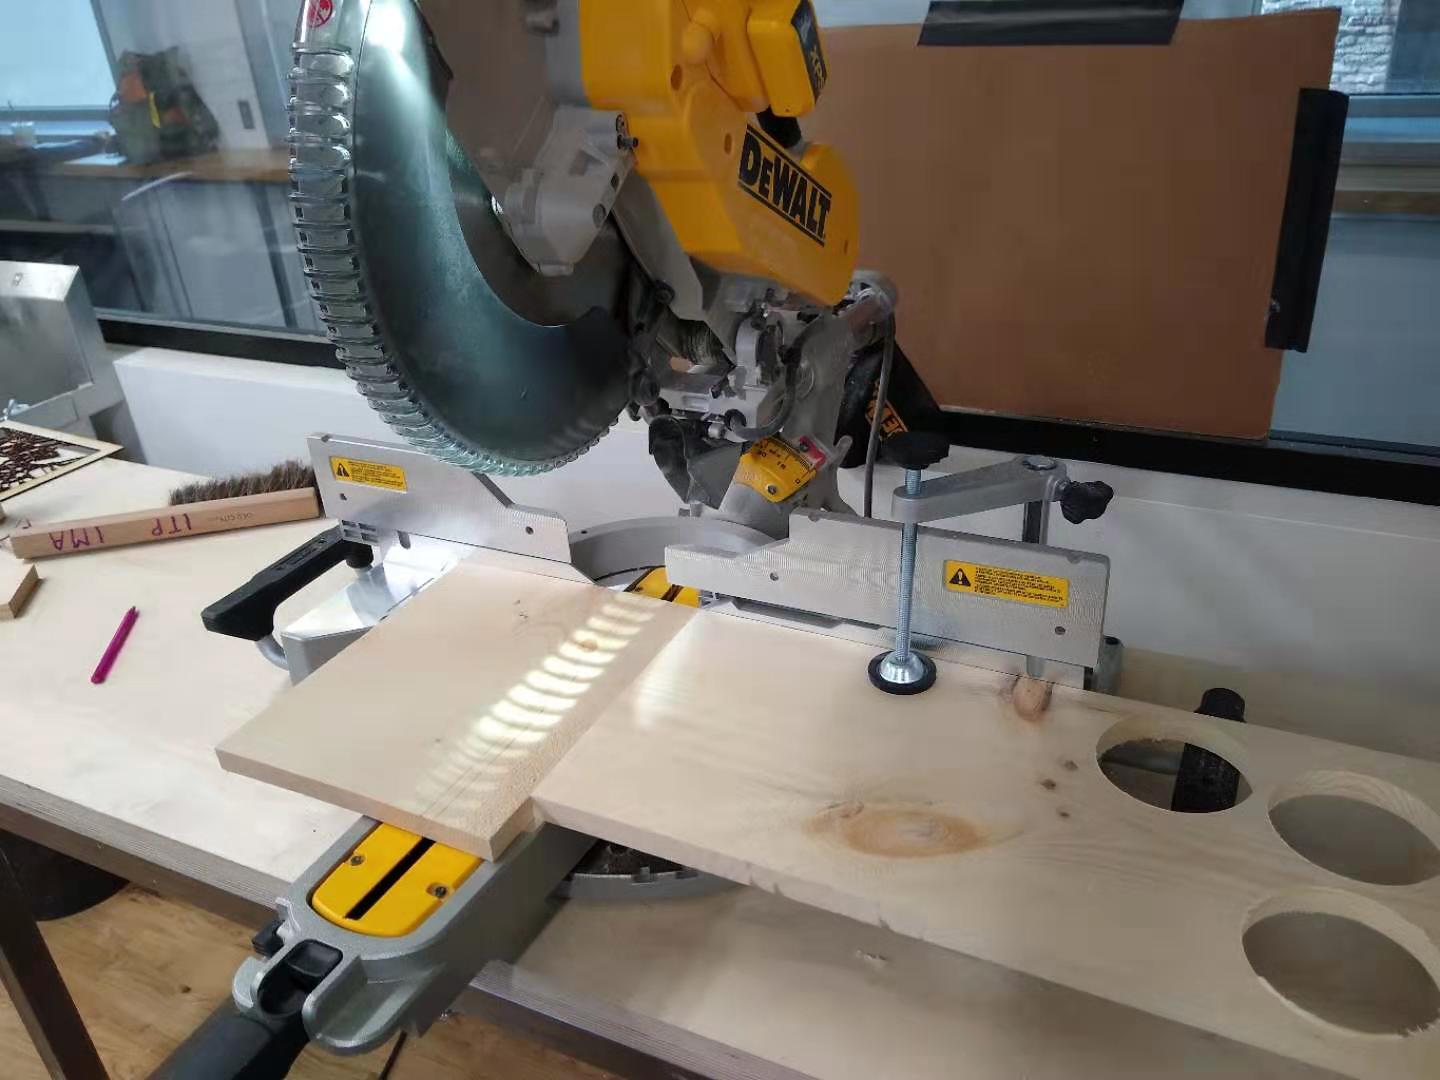 A piece of wood under the miter saw.